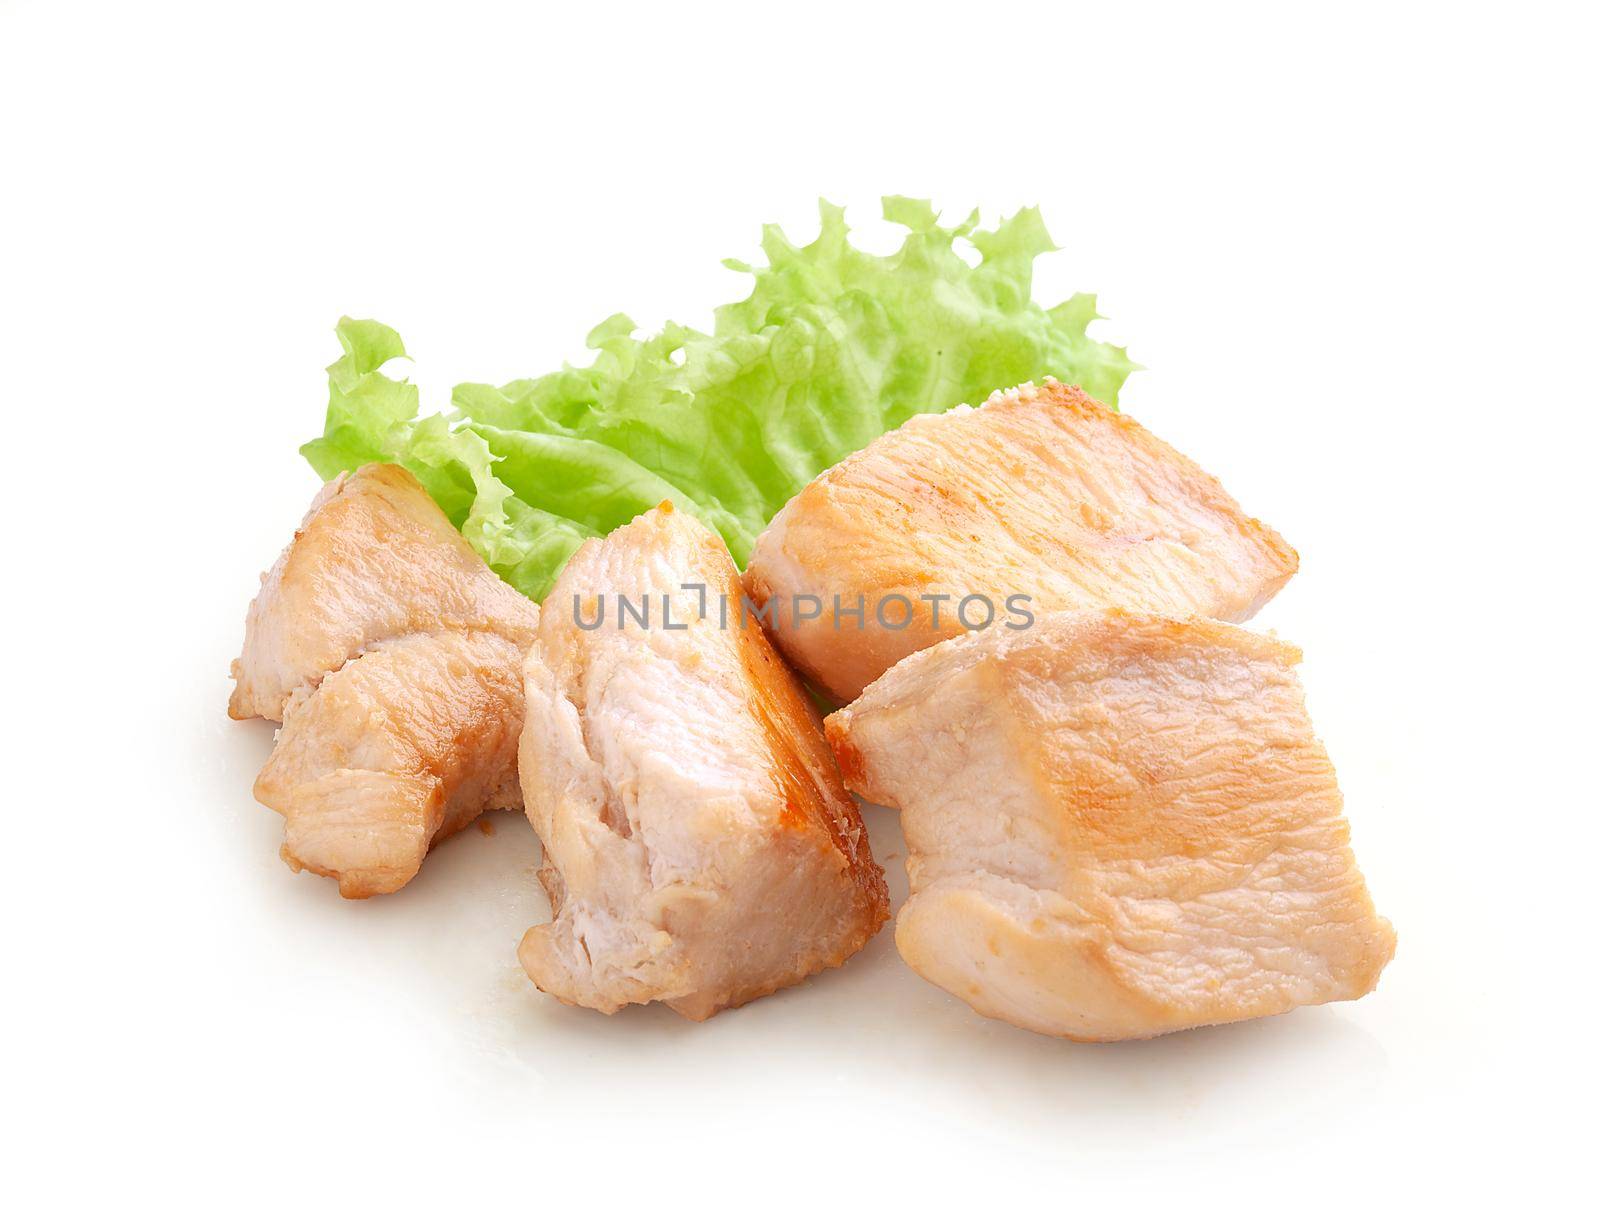 Fried chicken pieces with fresh green lettuce